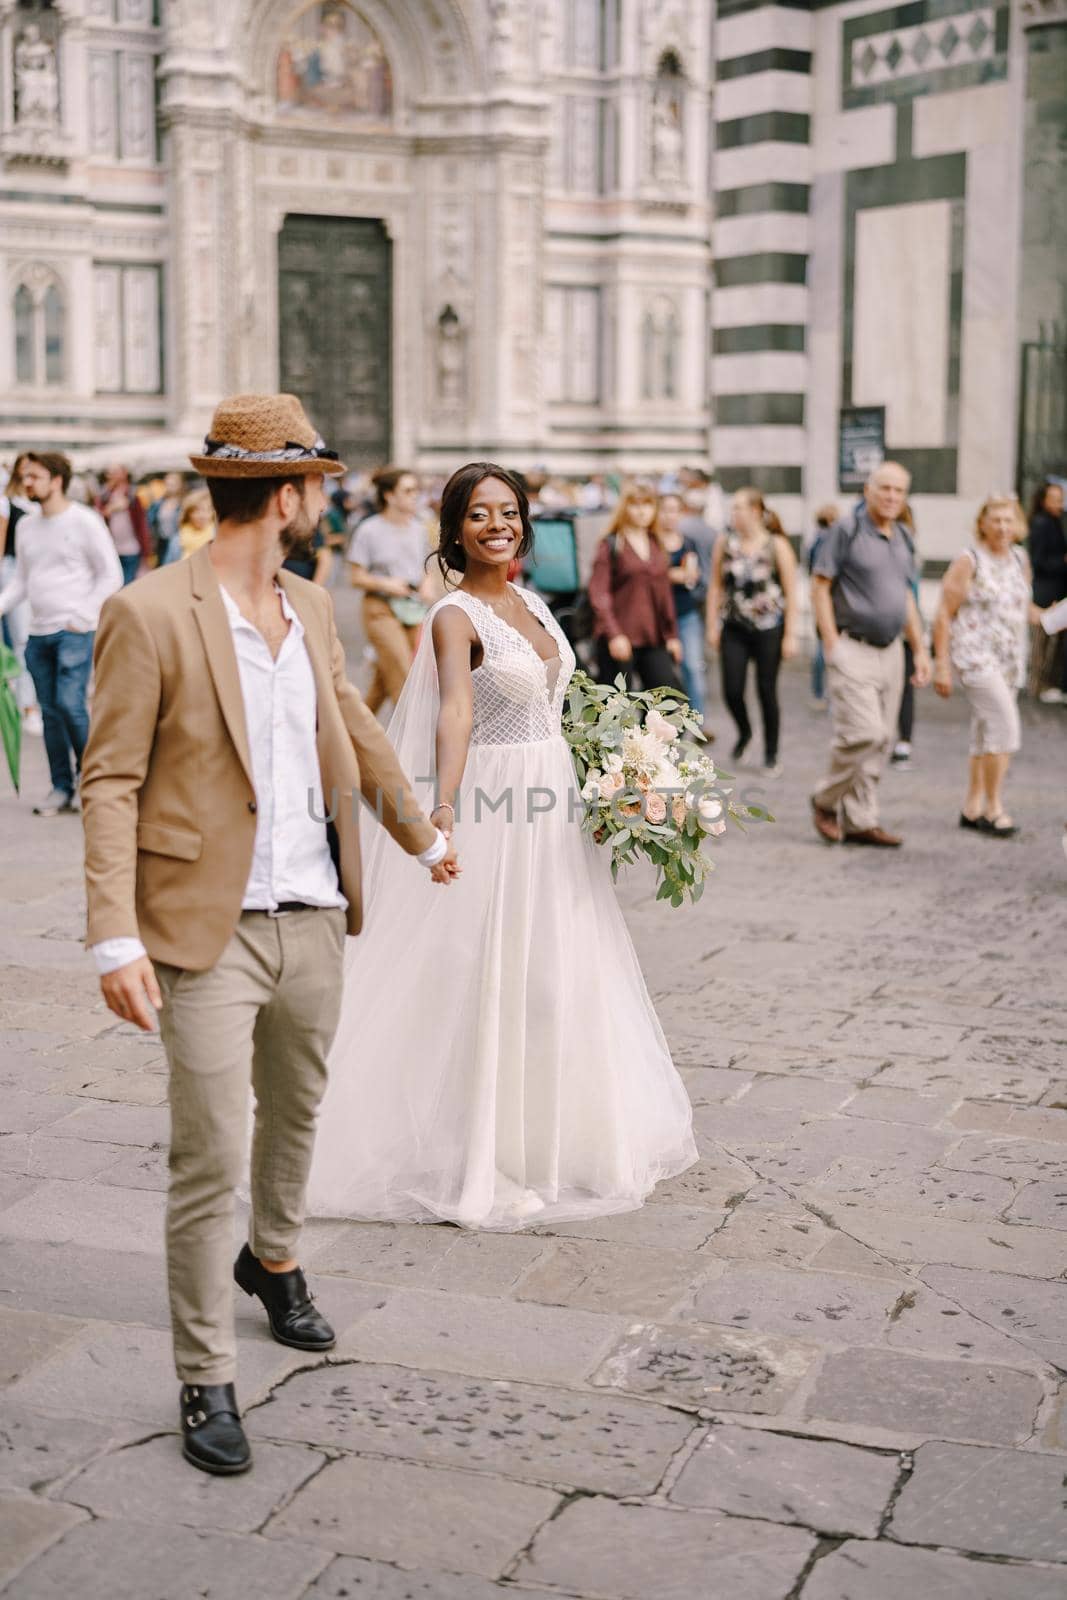 Interracial wedding couple. Wedding in Florence, Italy. African-American bride and Caucasian groom walk along the Piazza del Duomo. by Nadtochiy